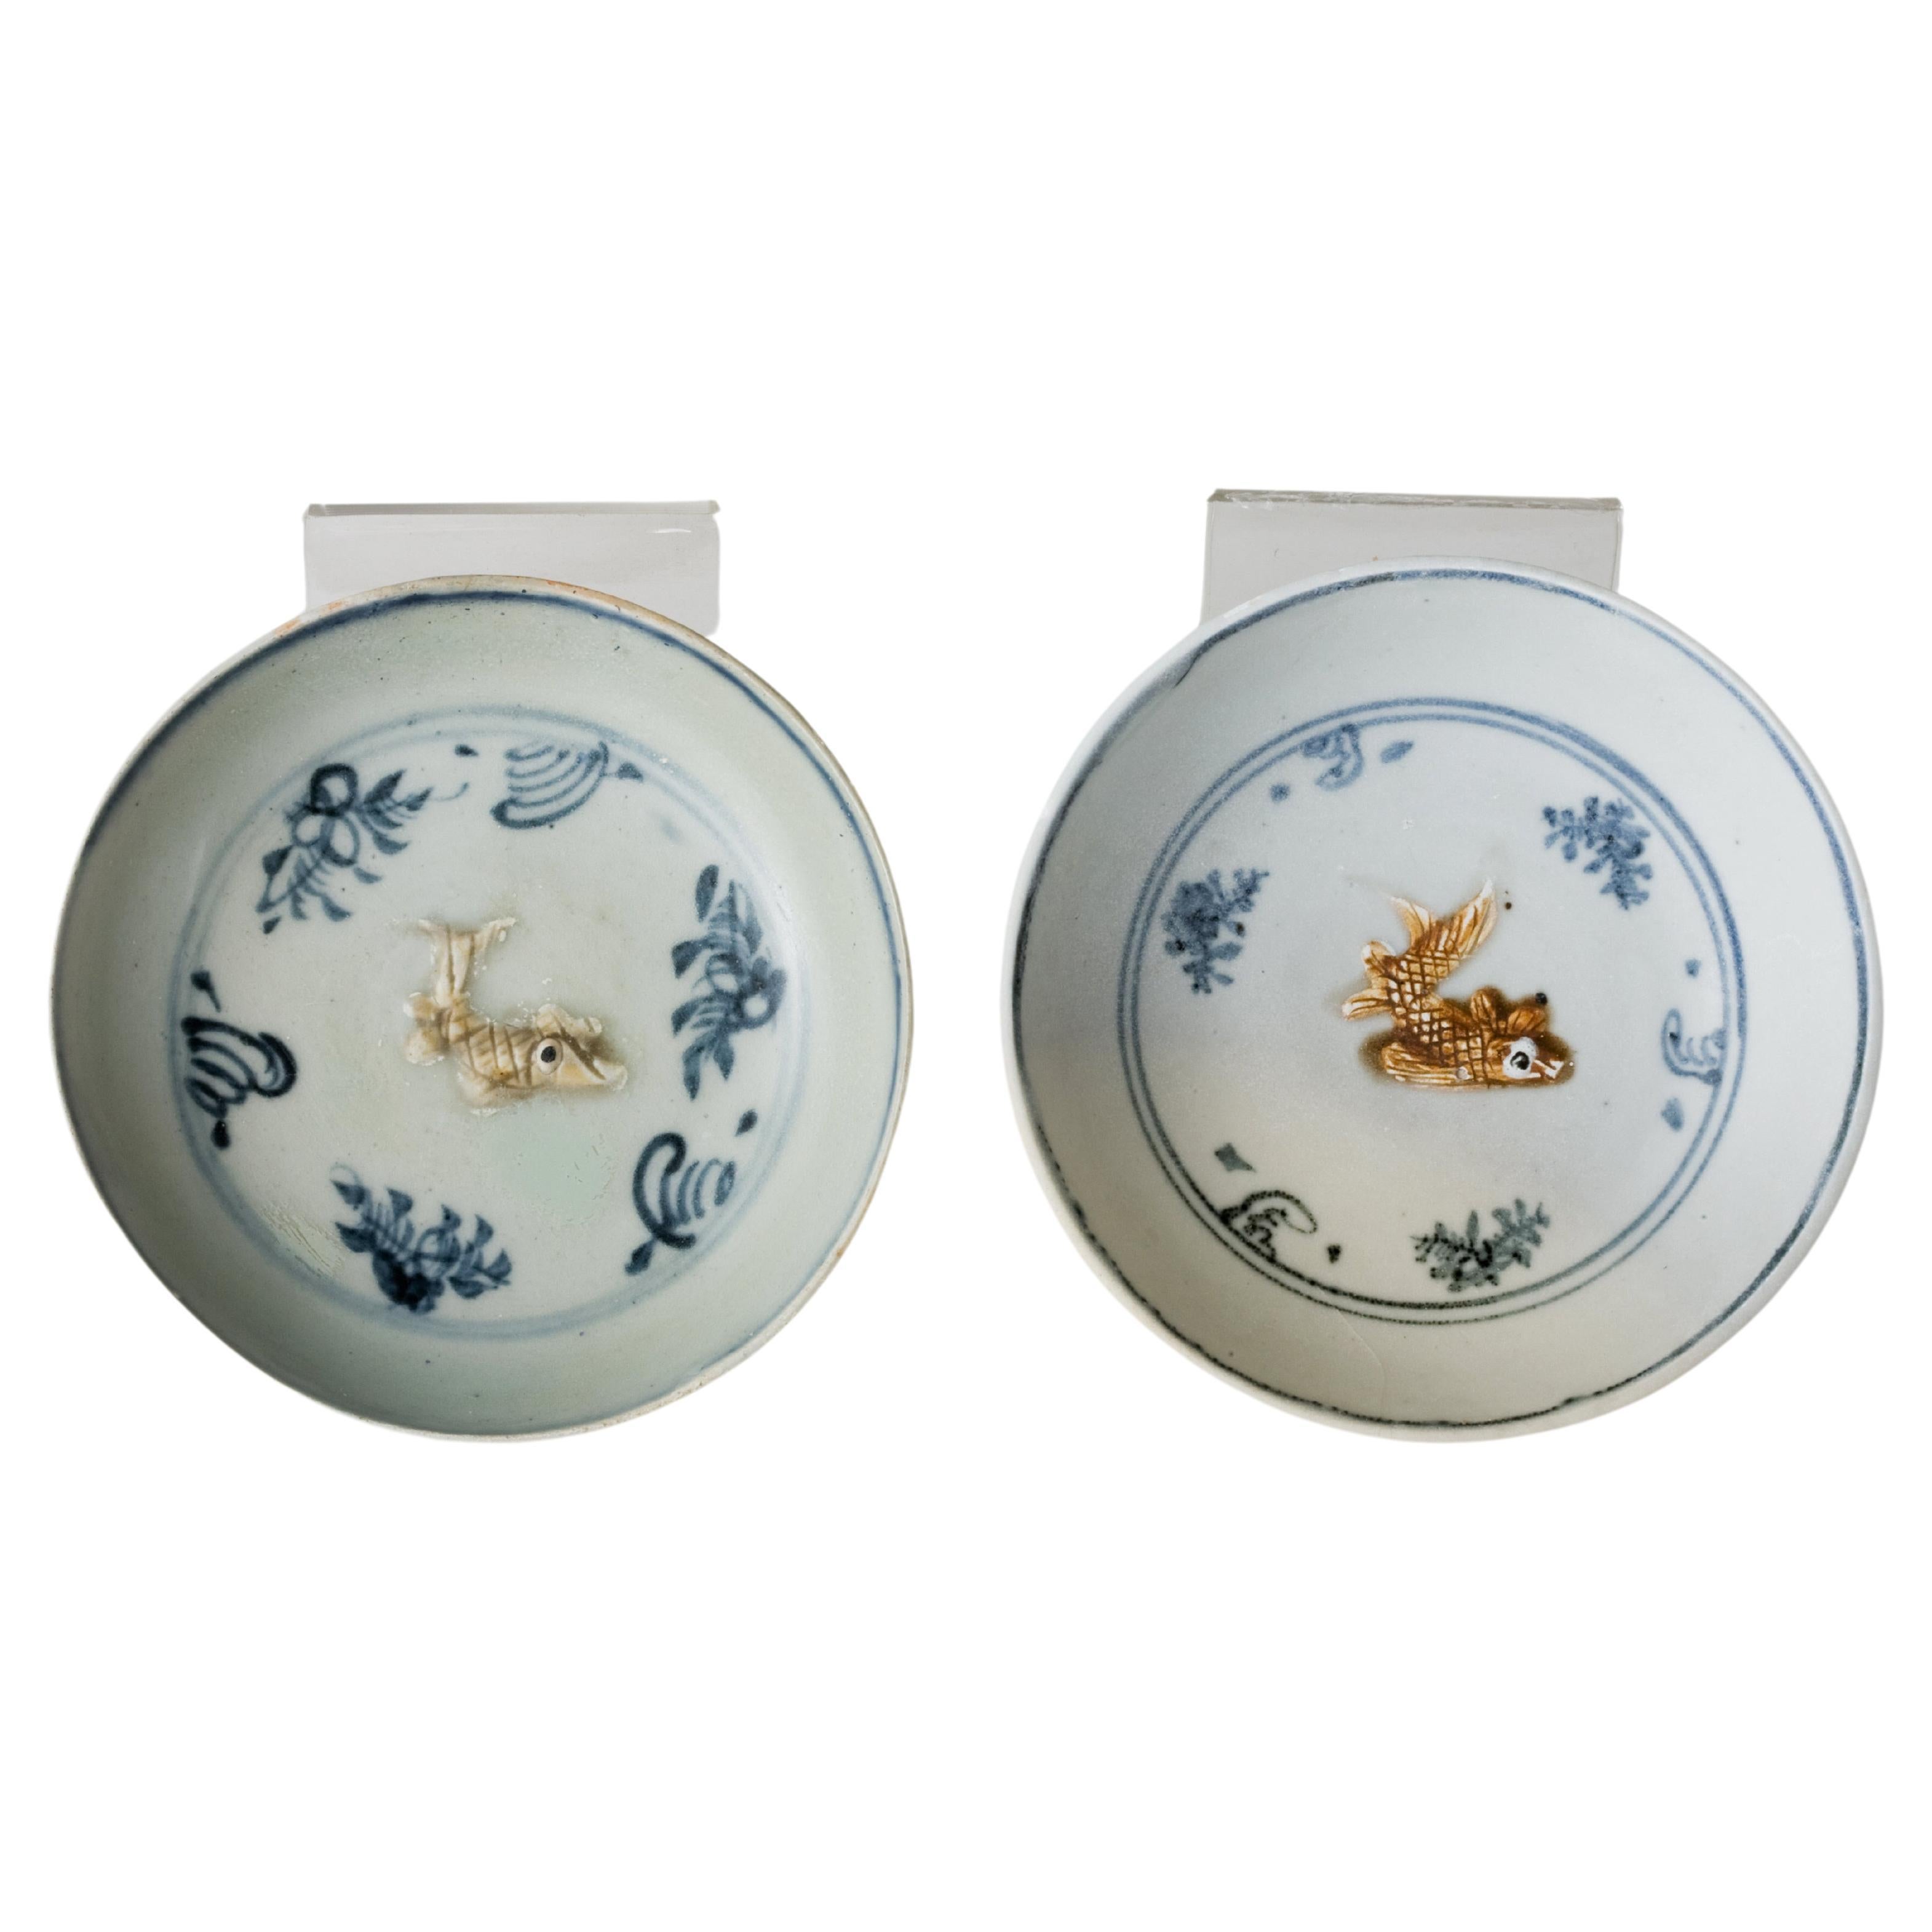 Moulded Goldfish Blue and White Dishes, Ming Dynasty